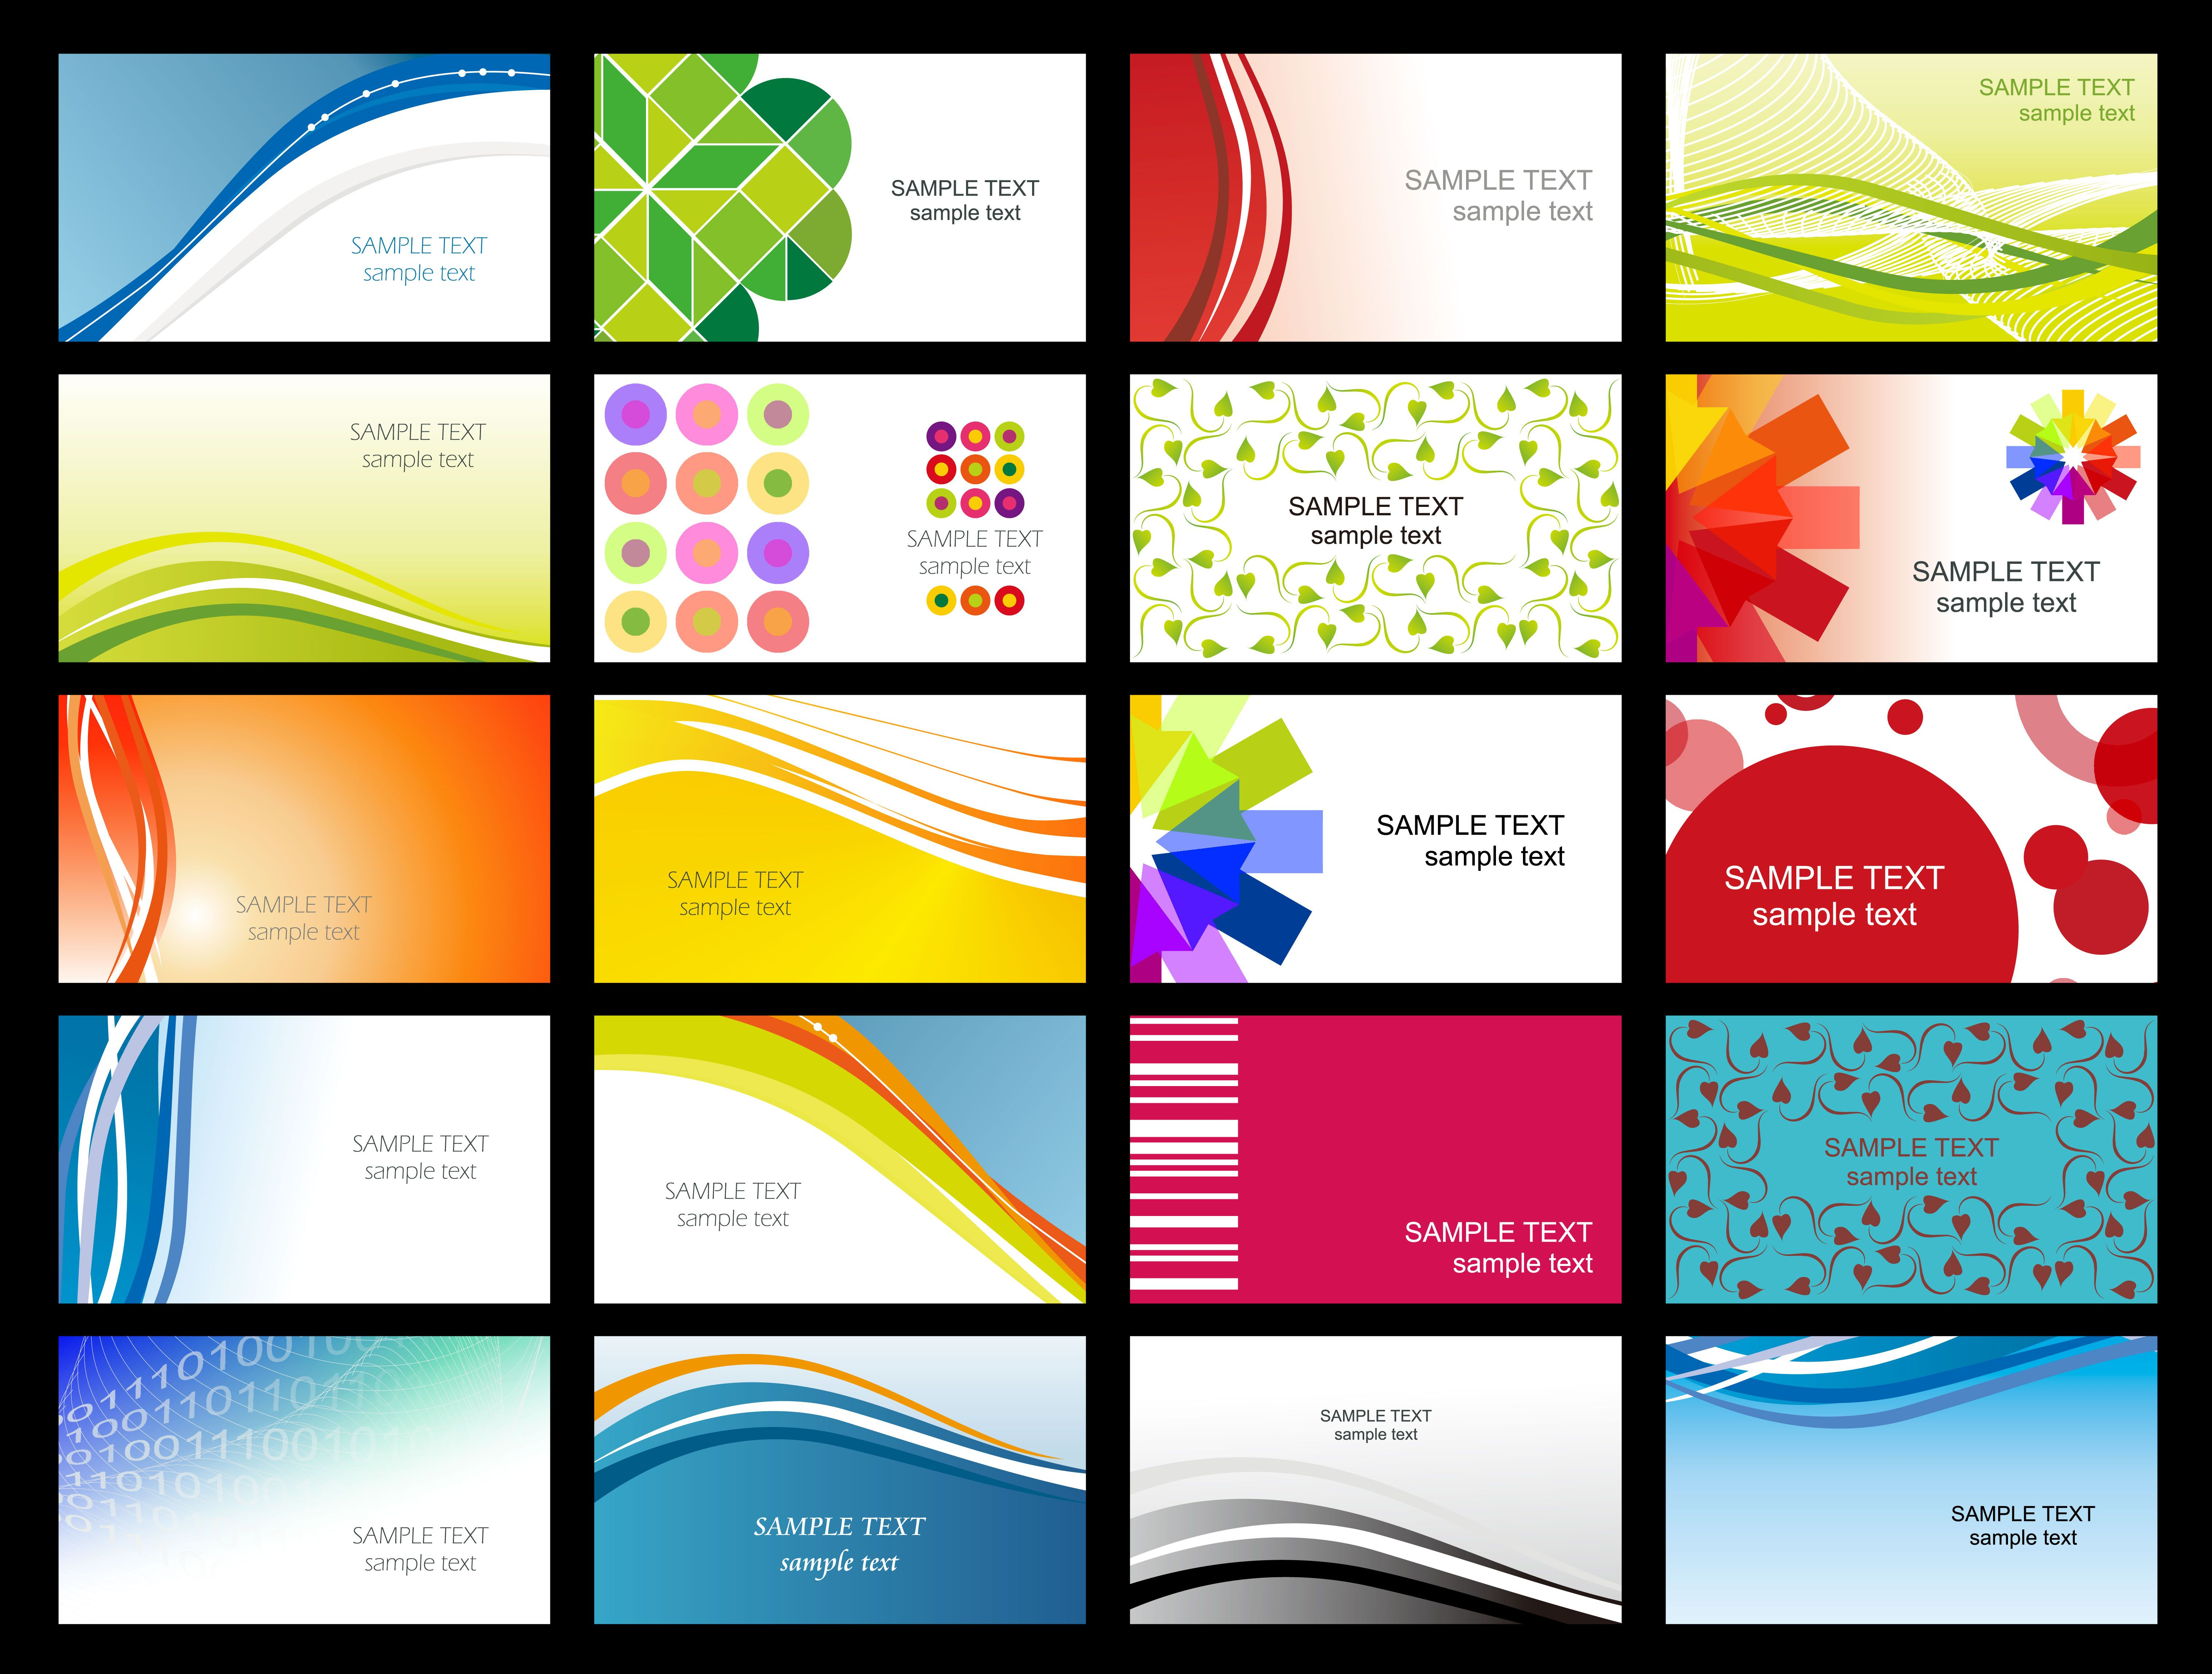 Free Vector Variety Of Dynamic Flow Line Of Business Card For Templates For Visiting Cards Free Downloads